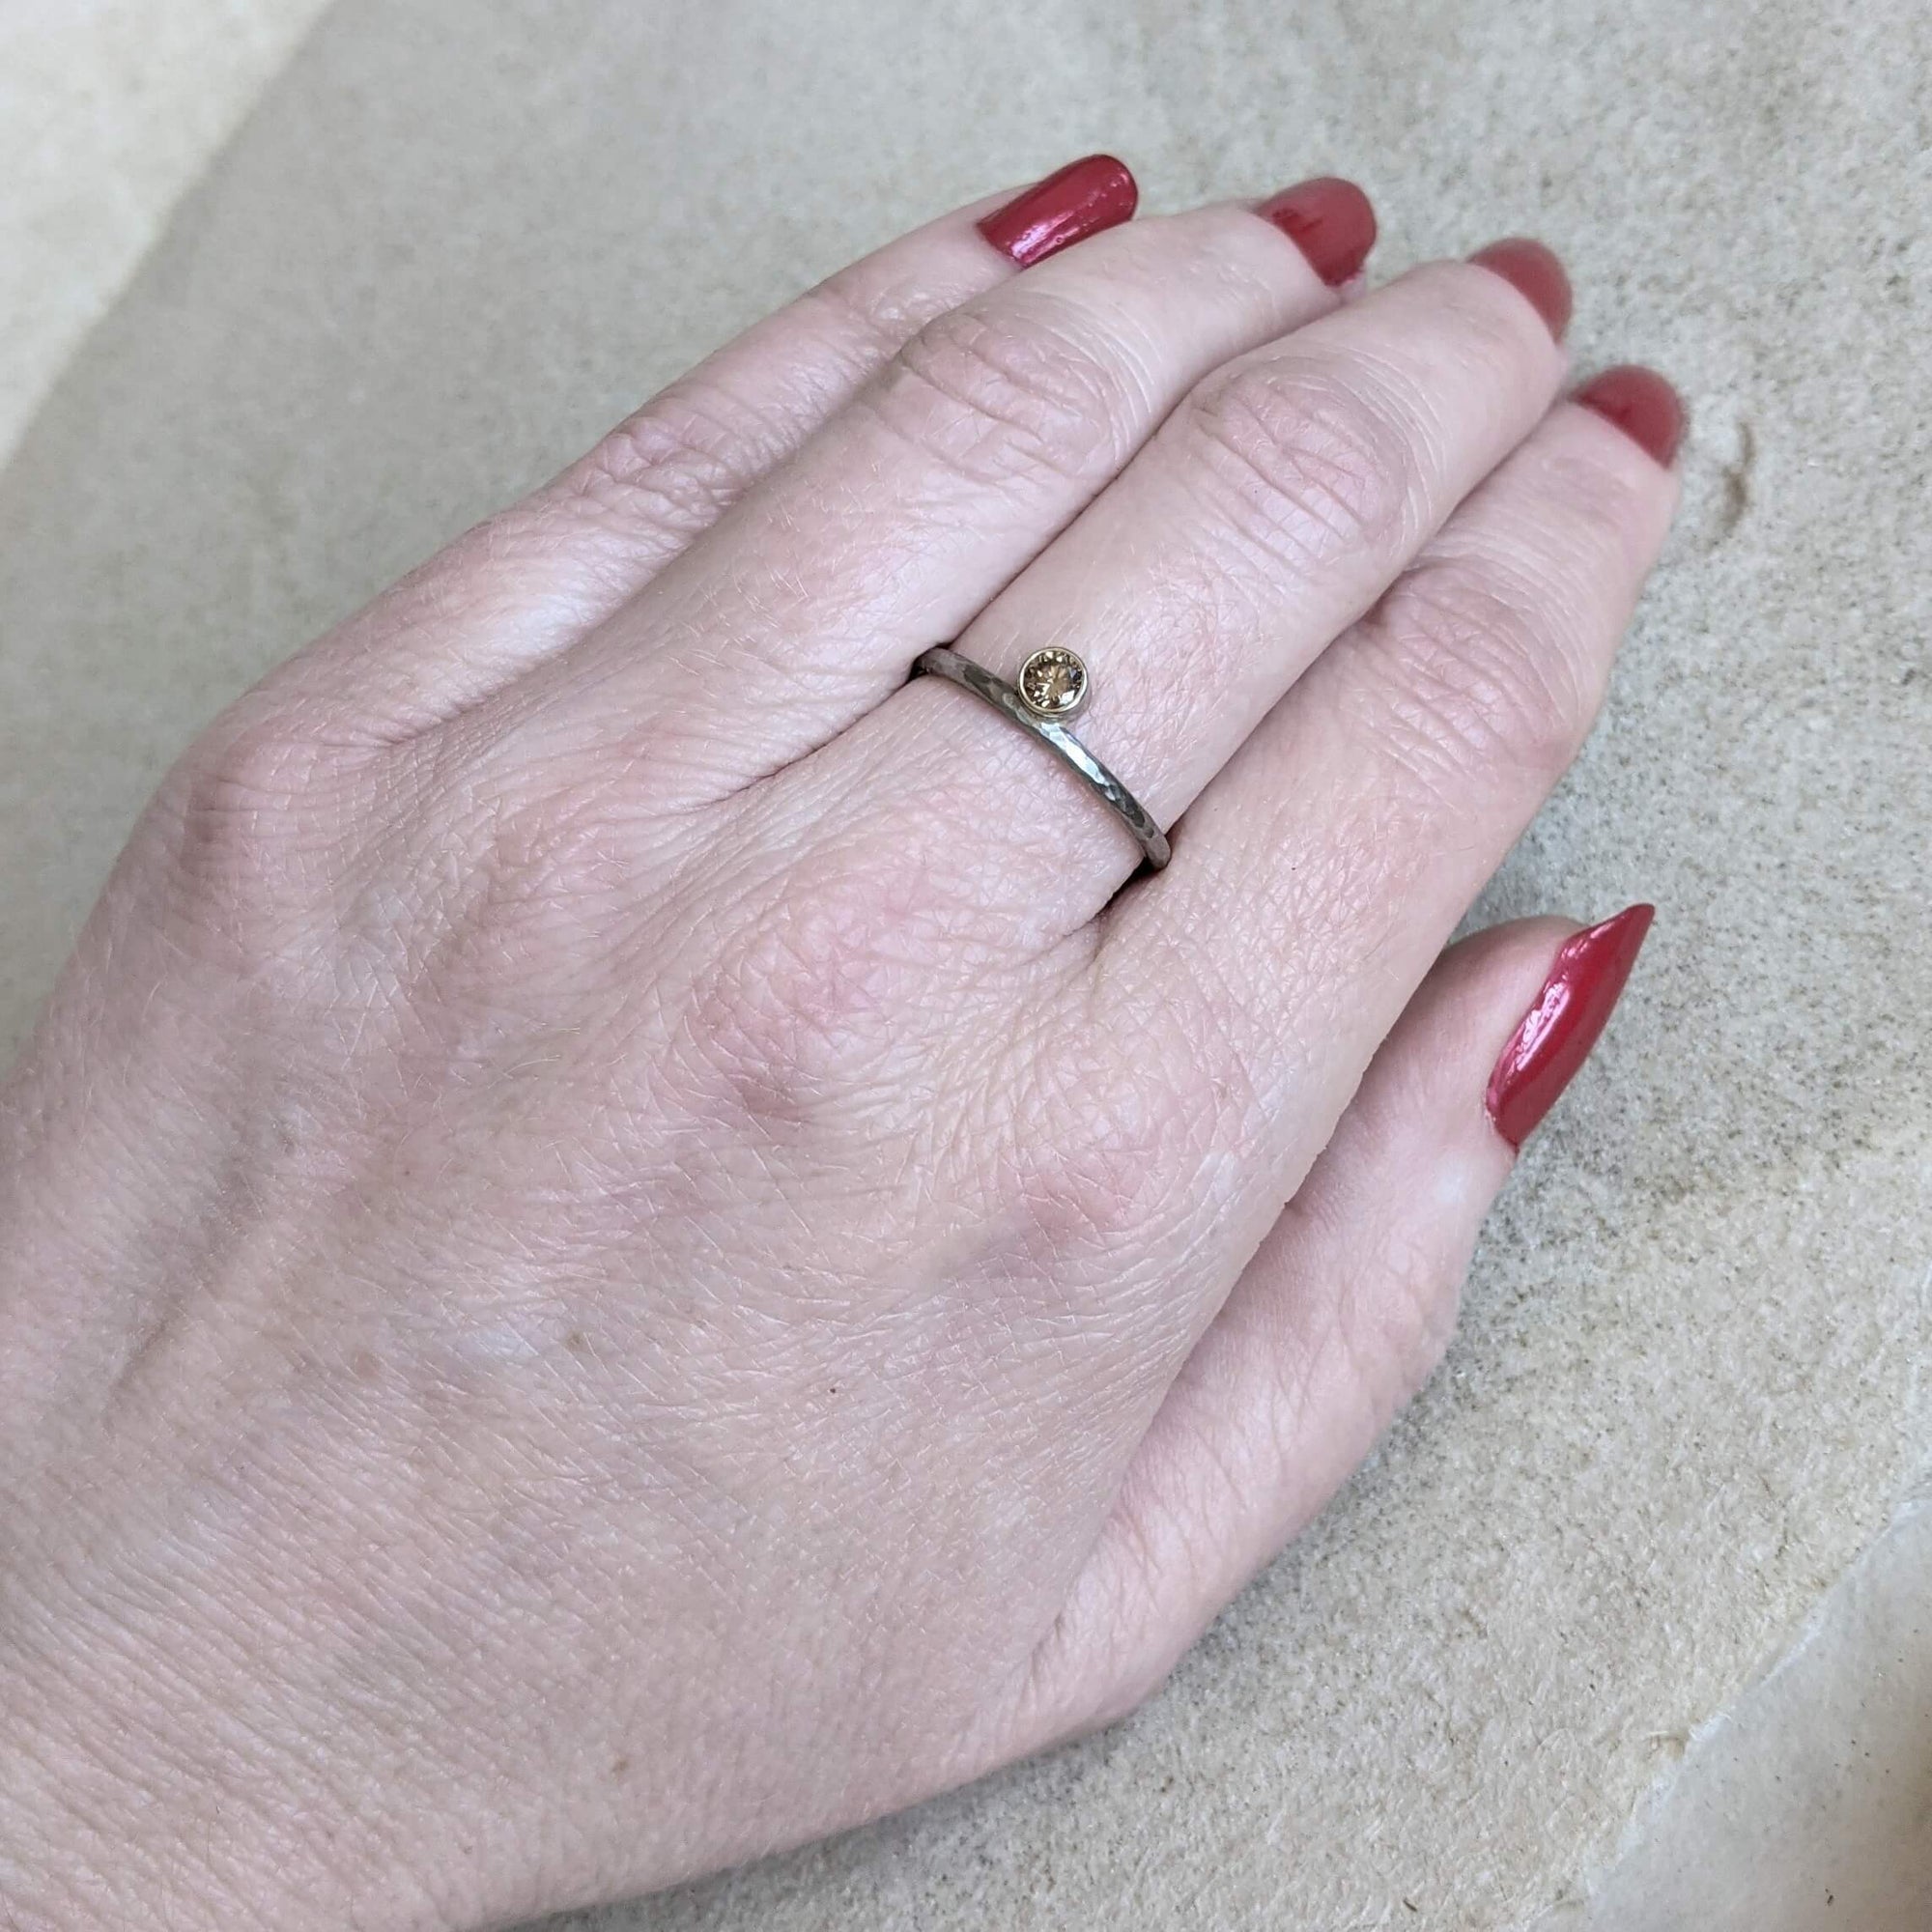 Offset champagne diamond stacking ring. Handmade by EC Design Jewelry in Minneapolis, MN.